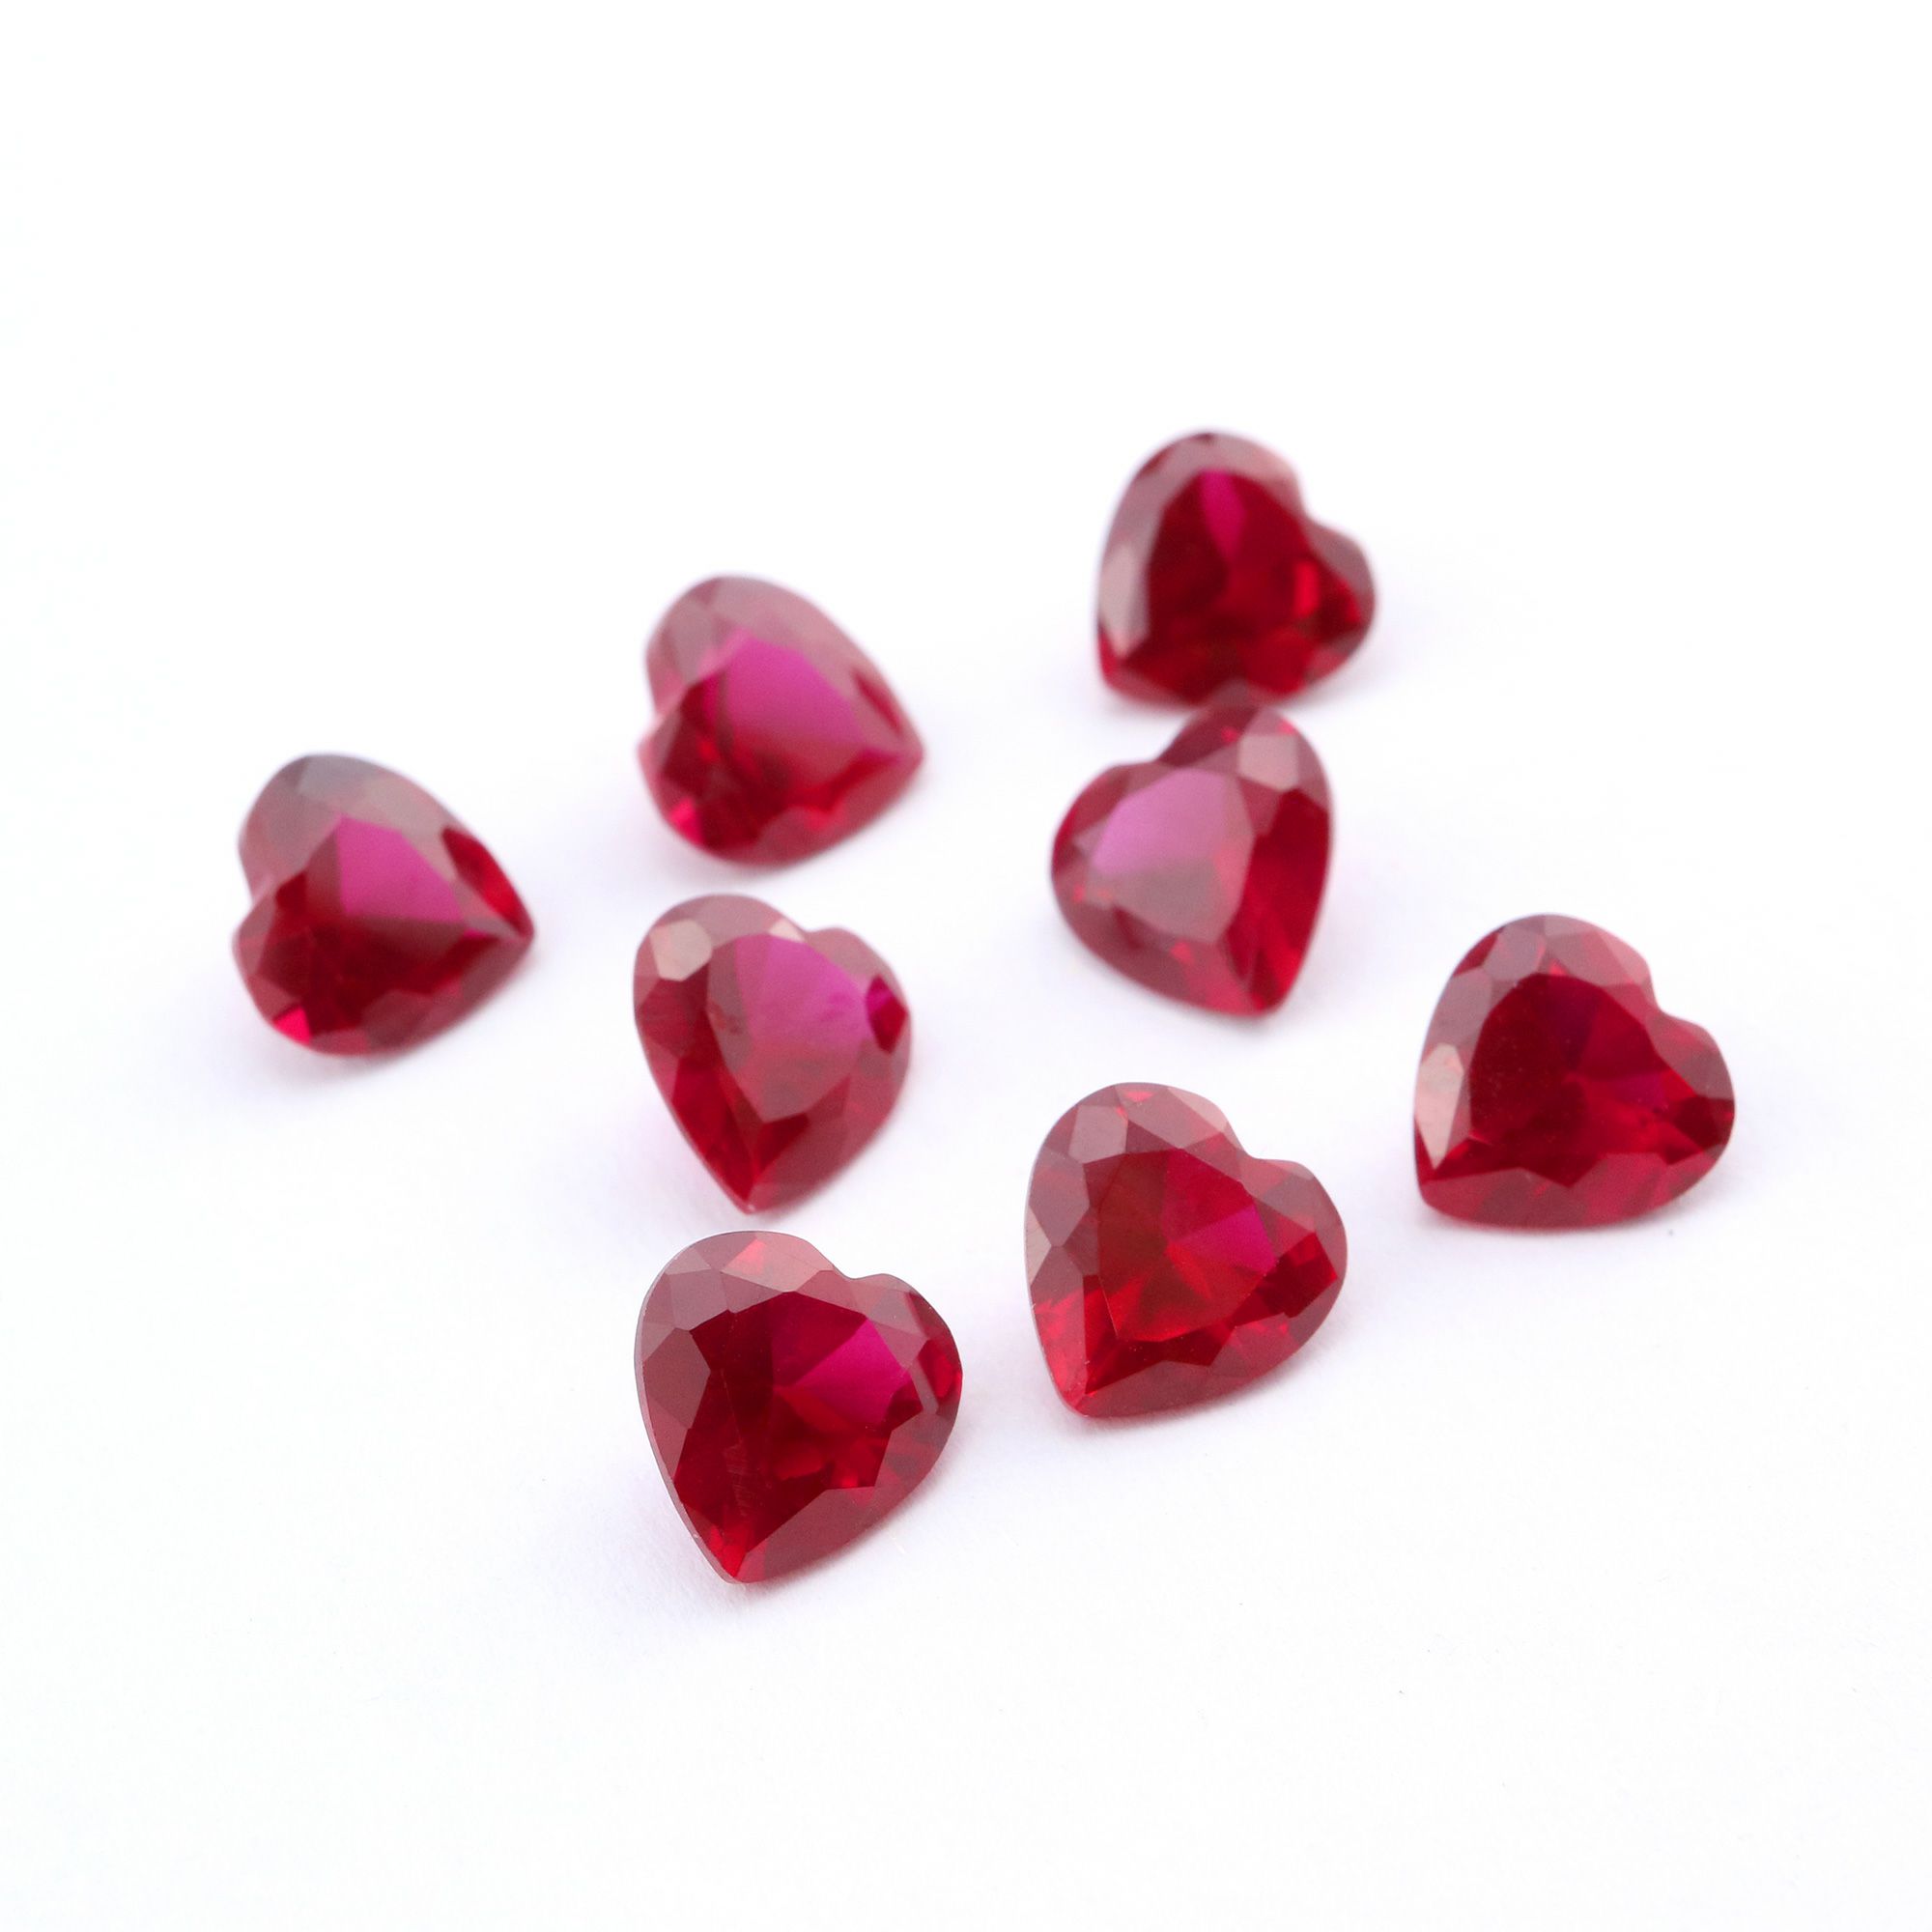 1Pcs Lab Created Heart Ruby July Birthstone Red Faceted Loose Gemstone DIY Jewelry Supplies 4130012 - Click Image to Close